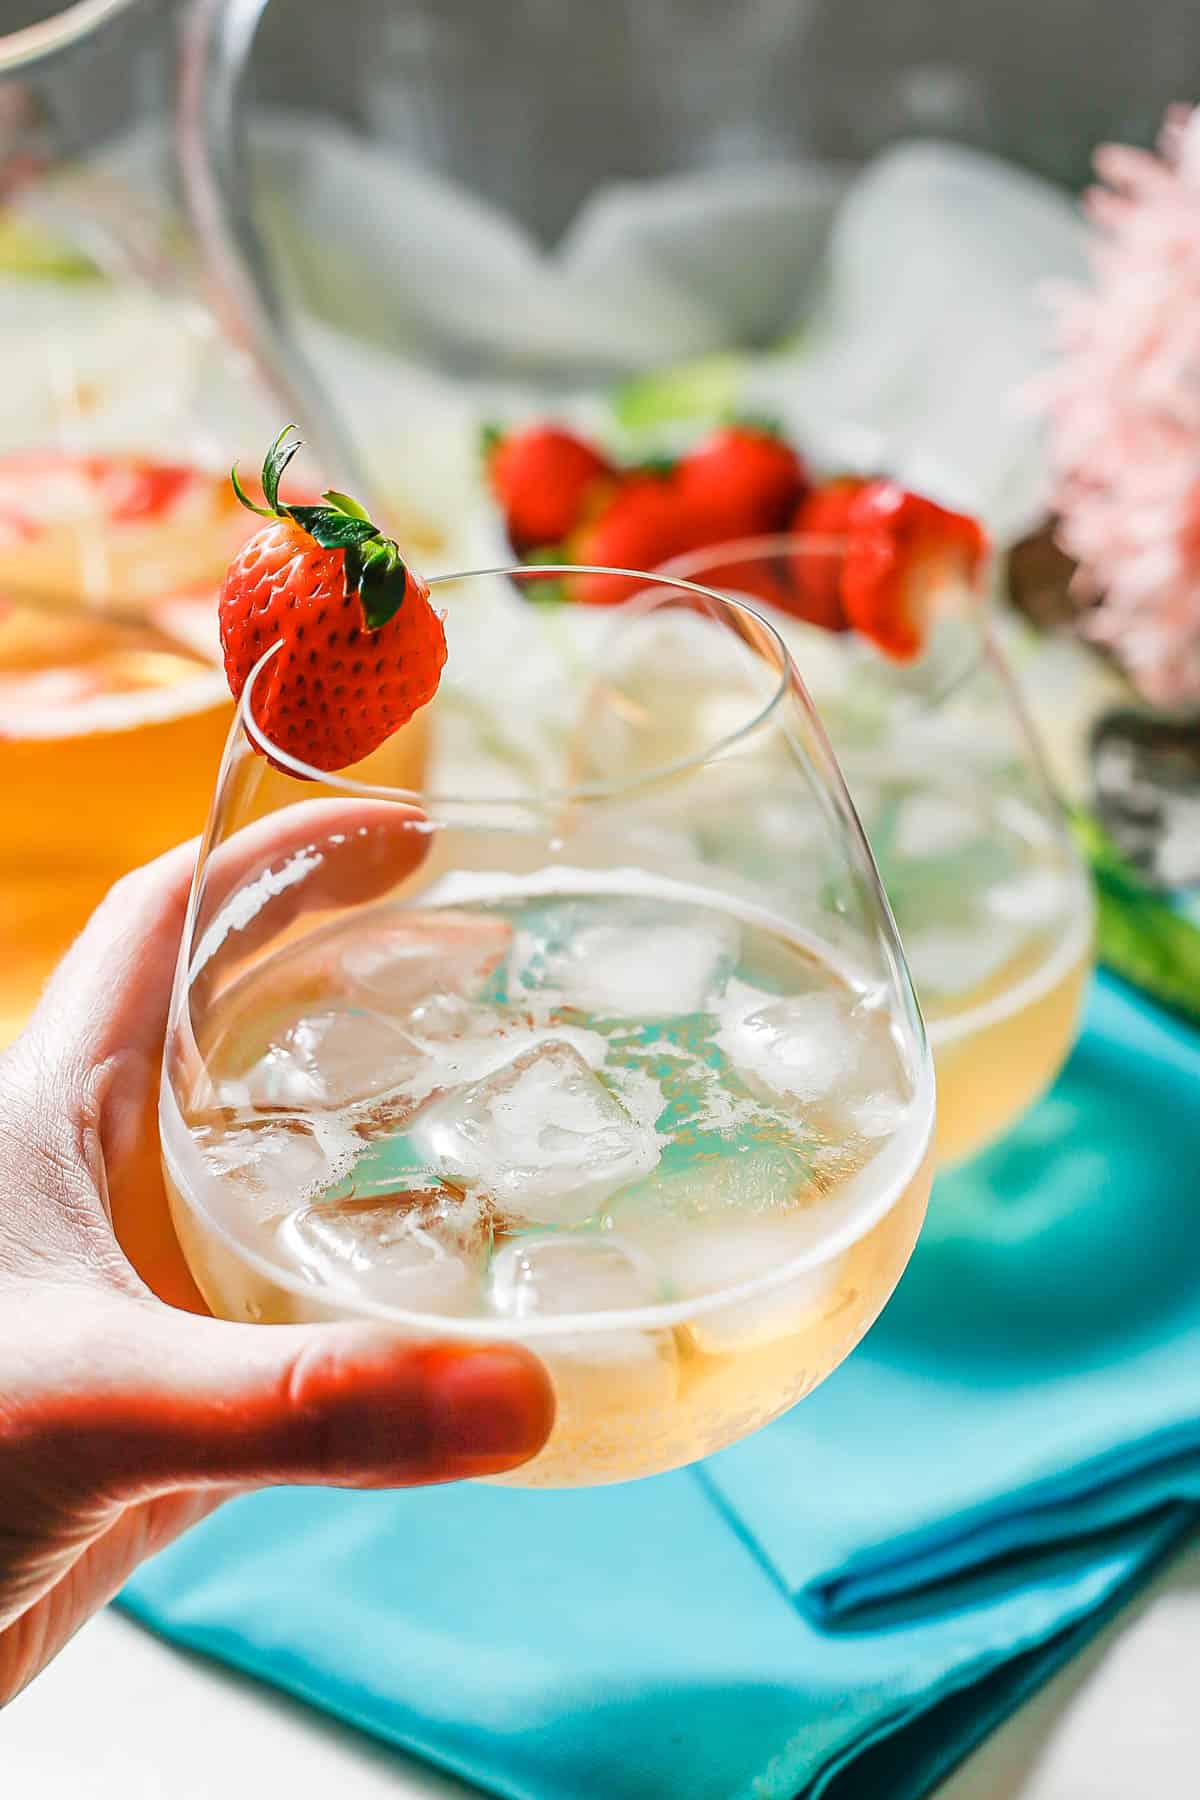 A hand holding up a stemless wine glass filled with an elderflower champagne cocktail garnished with a strawberry.